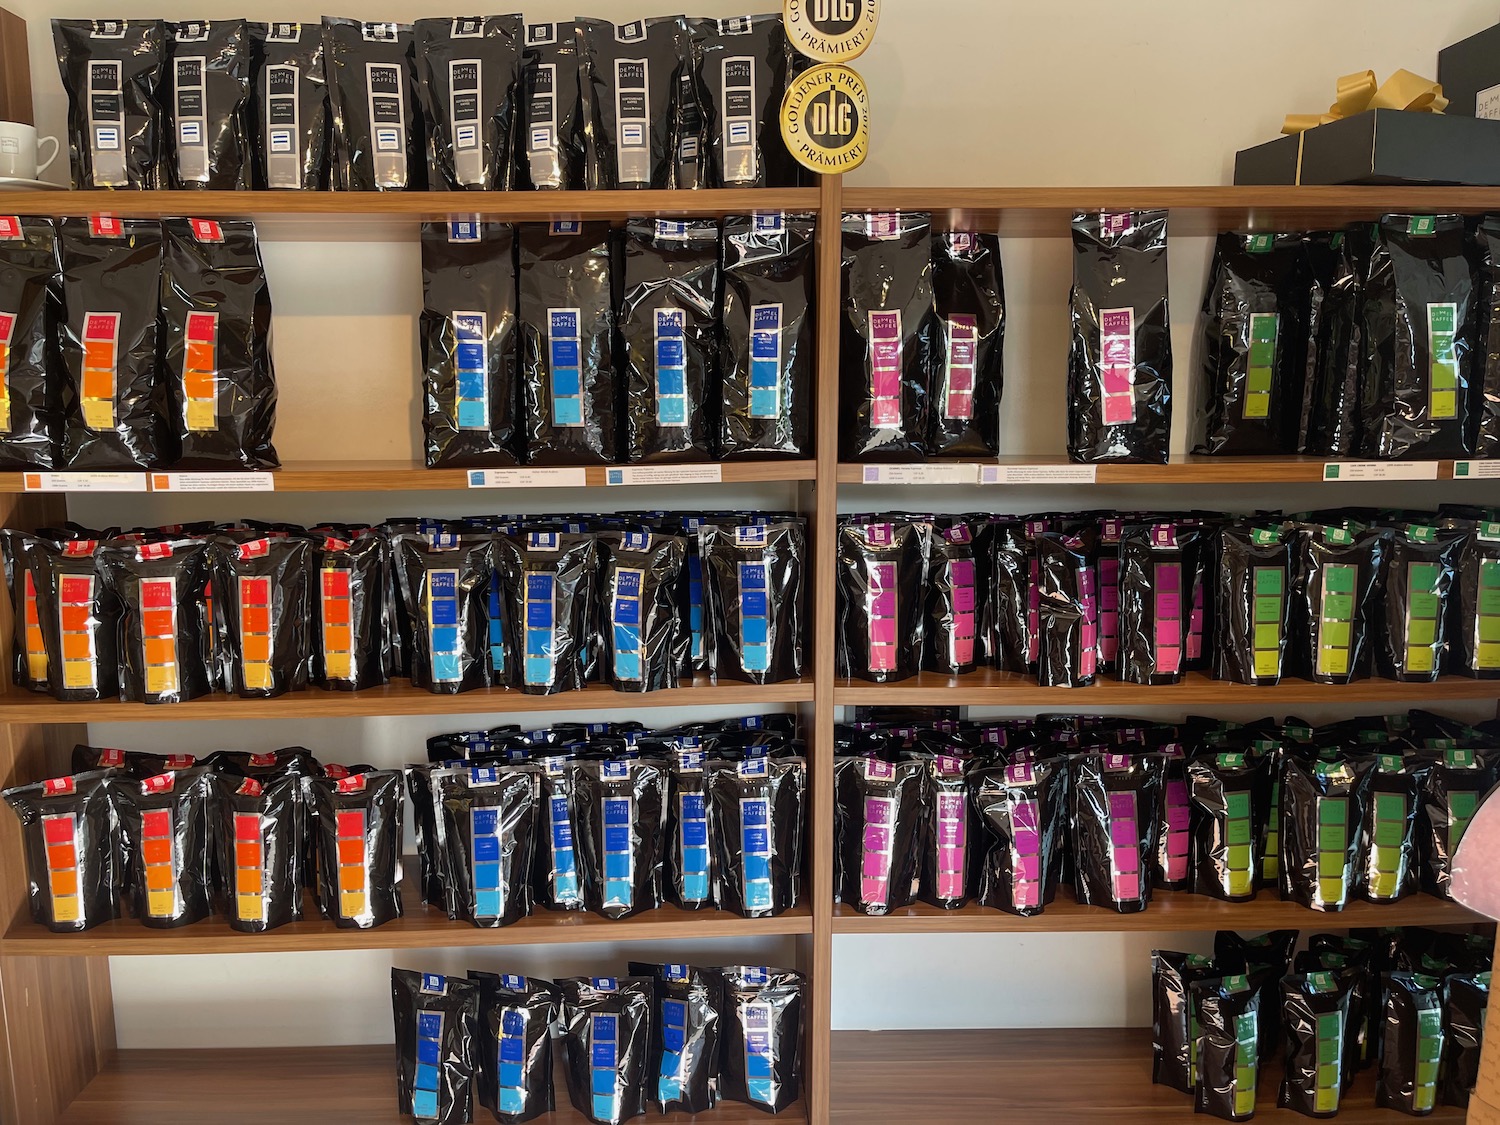 shelves of black bags with different colors on them